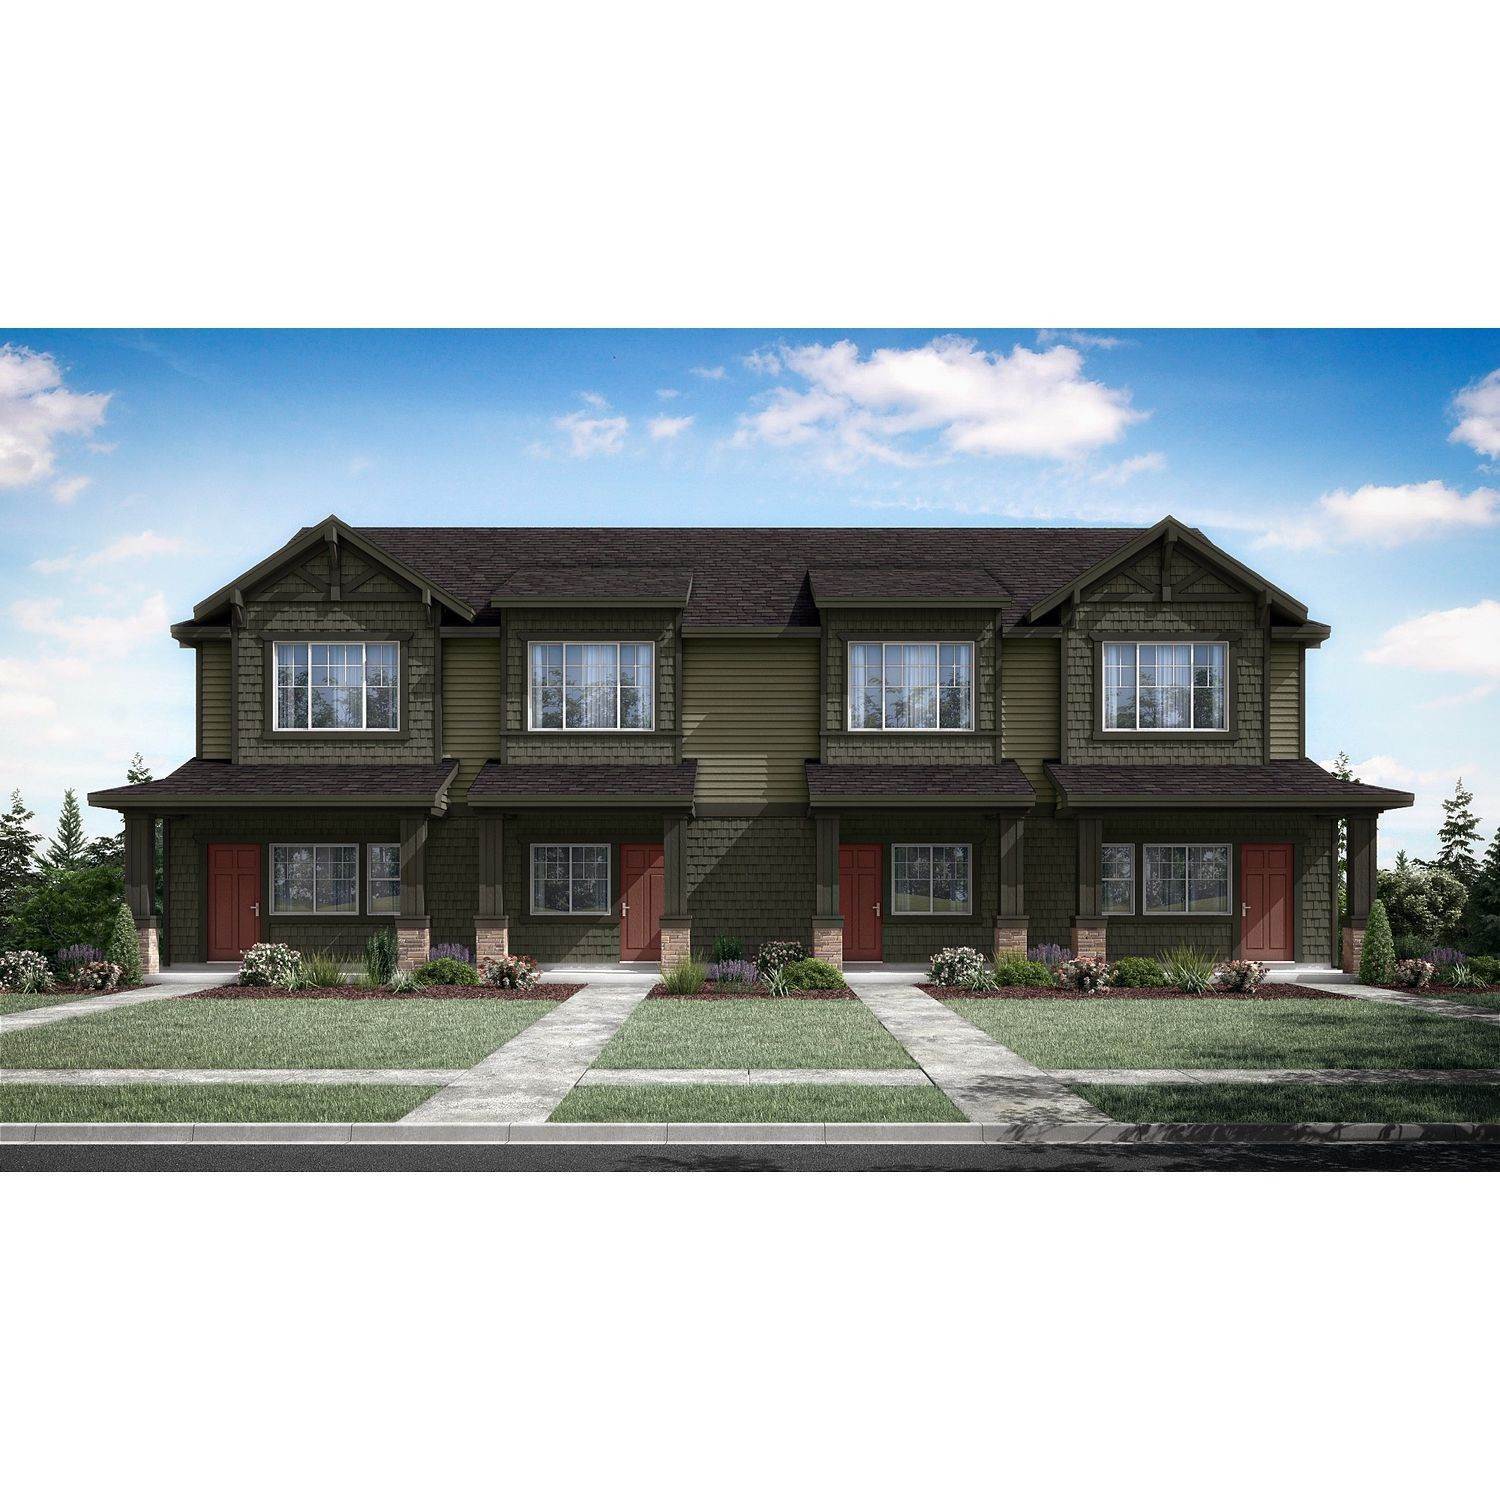 North Bethany Crest - Townhome Series building at 15931 NW Hosmer Lane, Portland, OR 97229